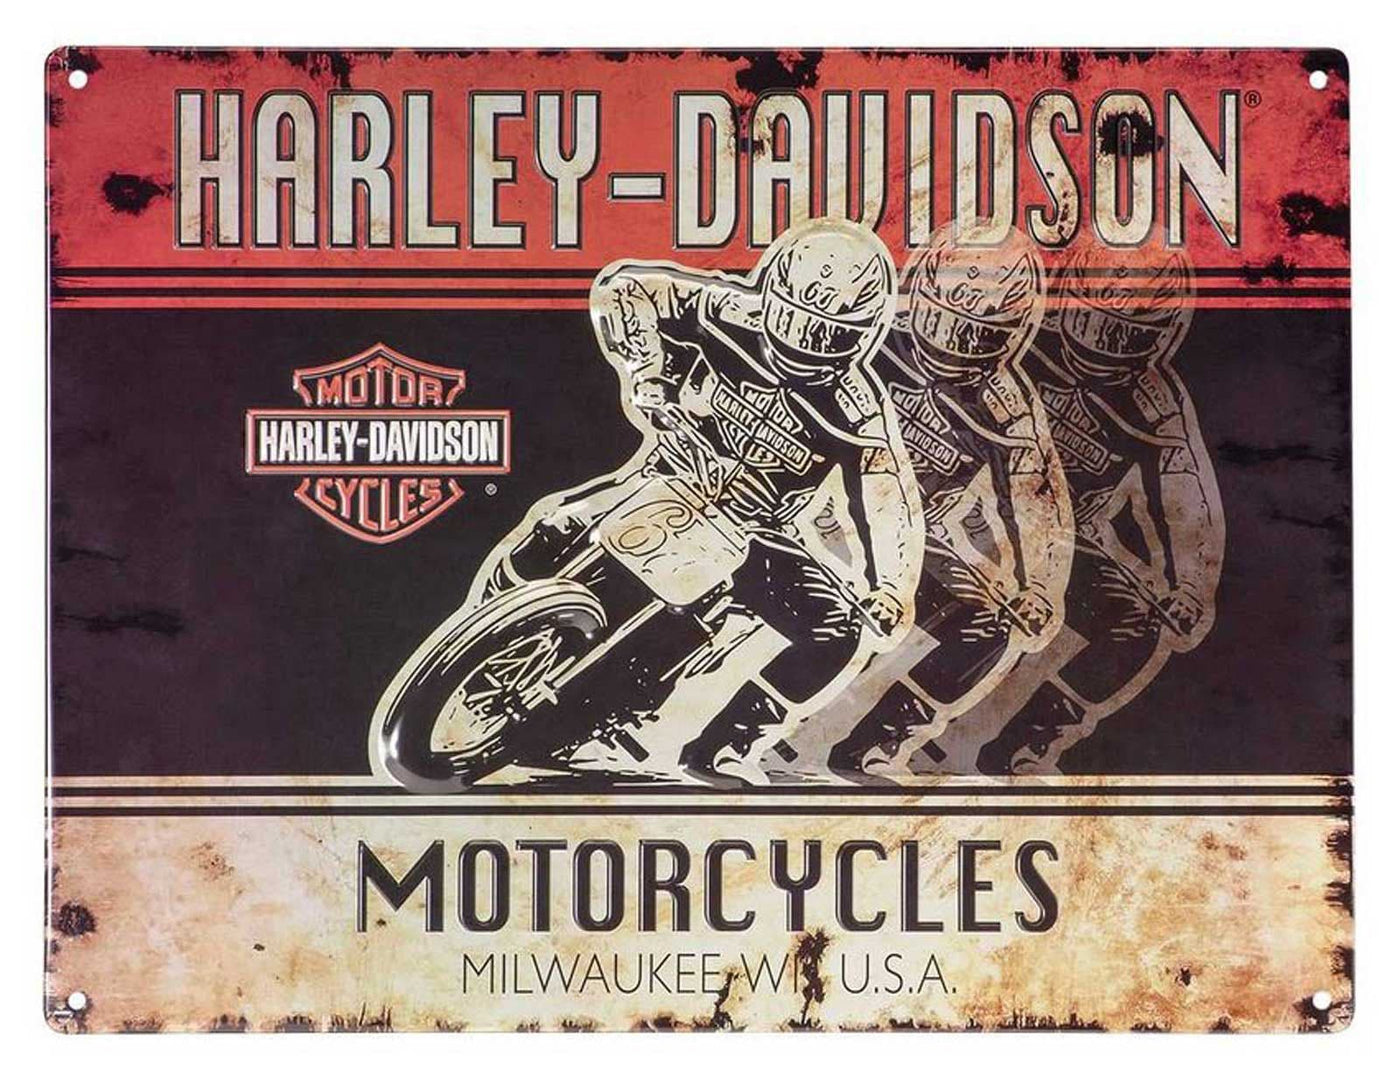 mbossed Racers Motorcycle Tin Sign - 15.75 x 12 inches HDL-15539